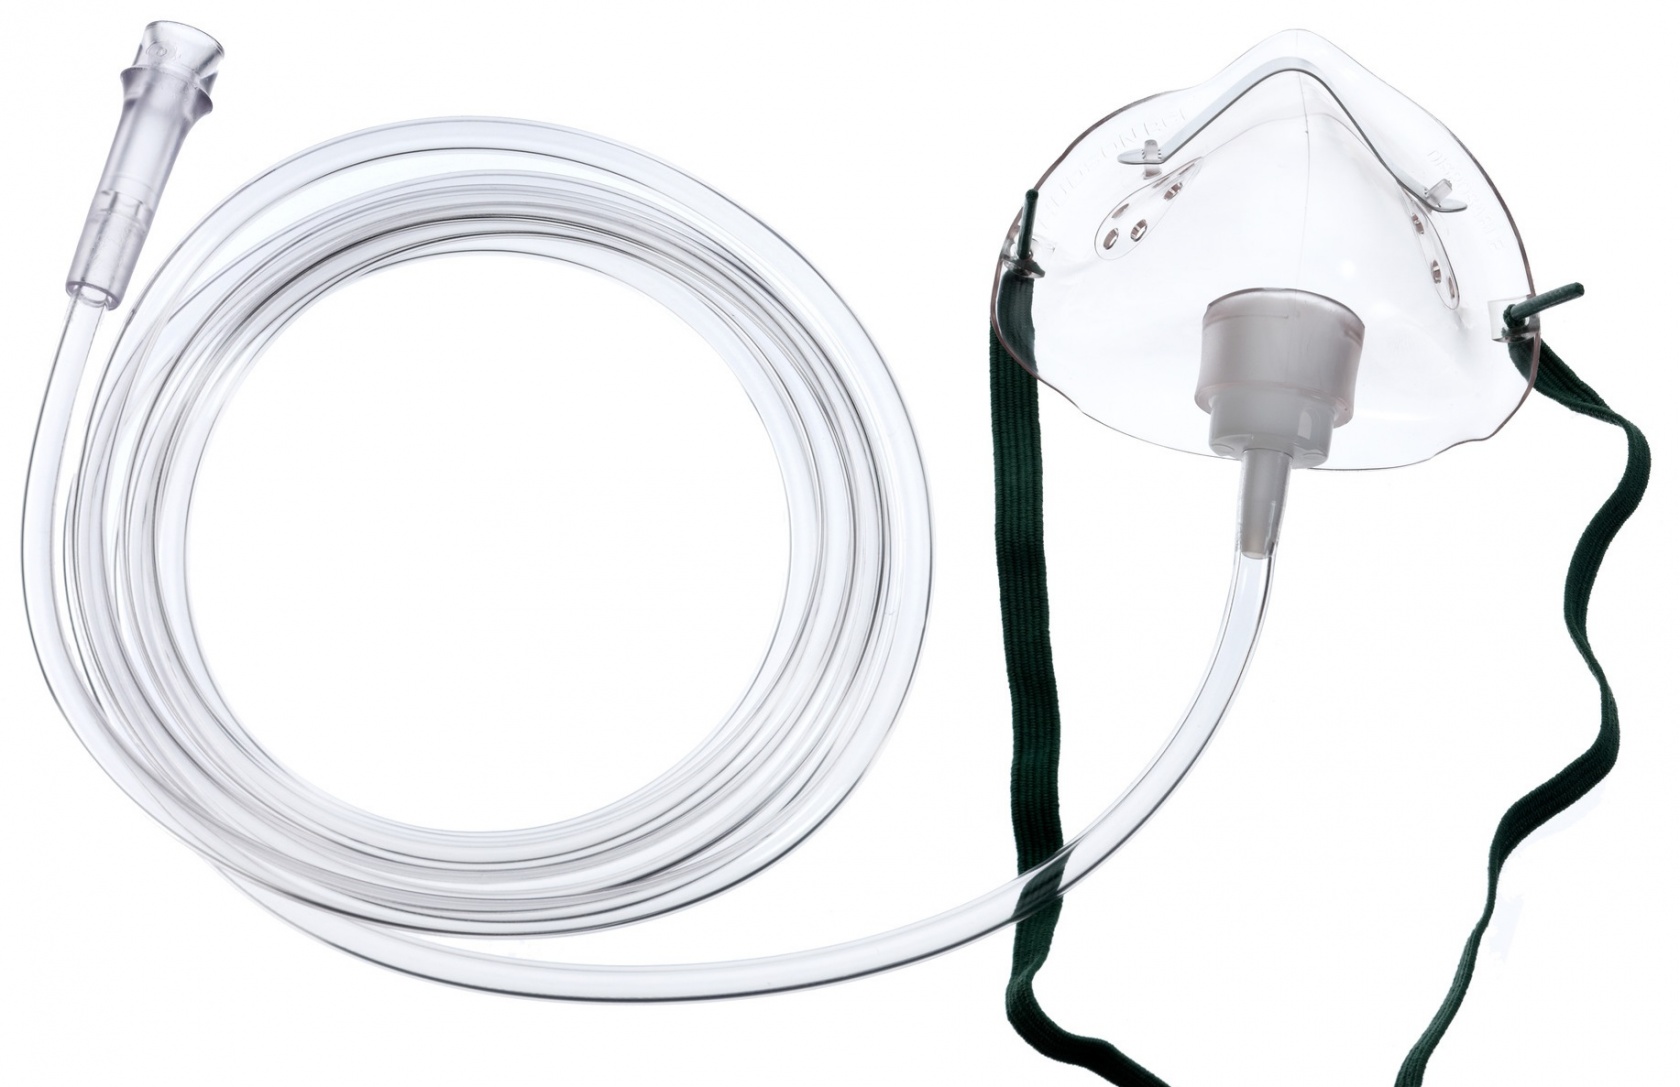 Hudson Mask Medium Concentration Elongated with 7ft Oxygen Tubing - Paediatric